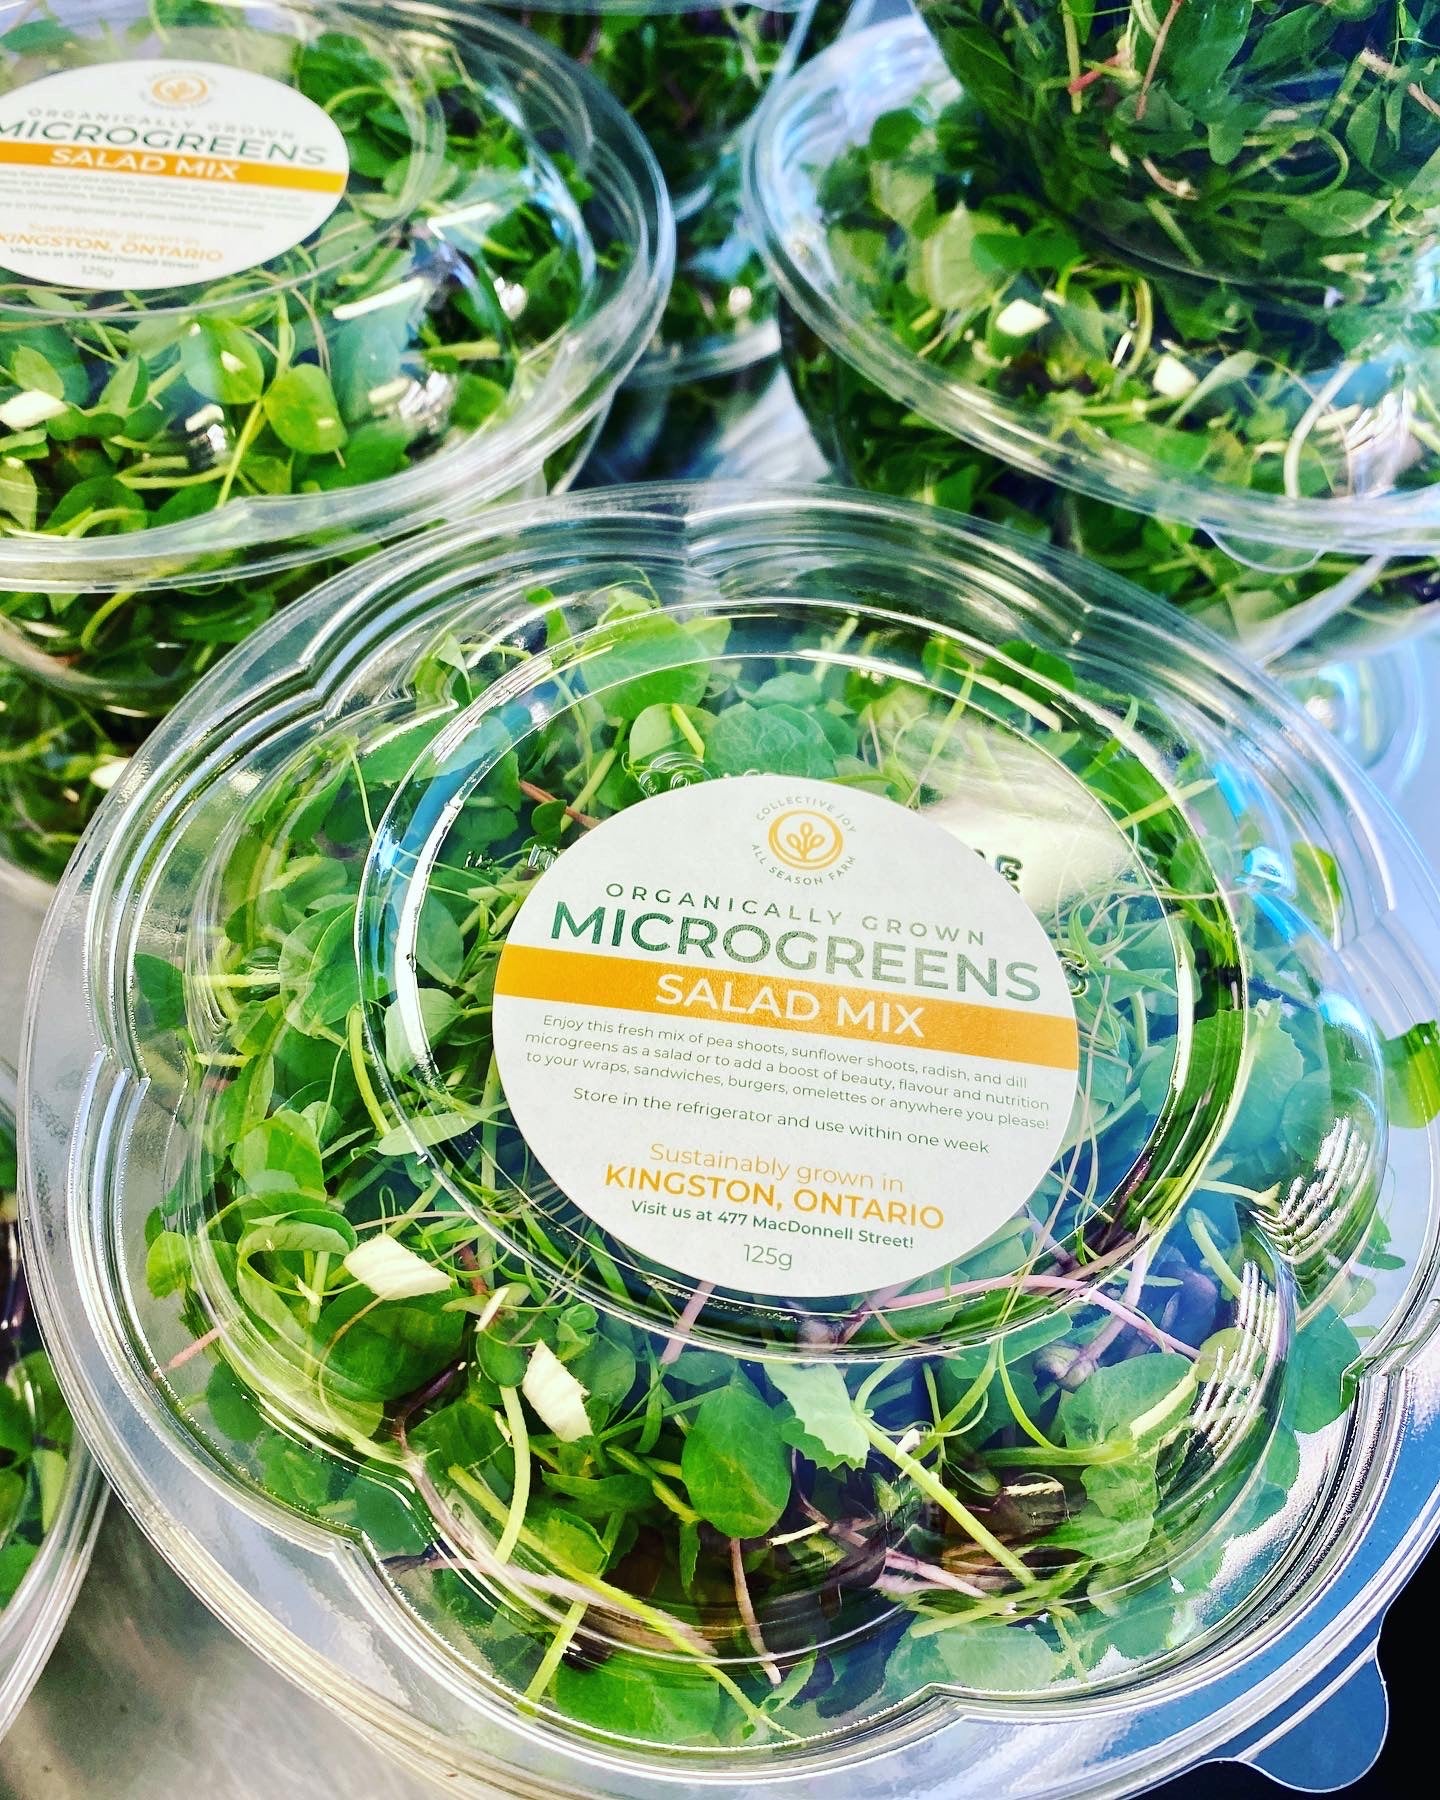 The Microgreens First Timer